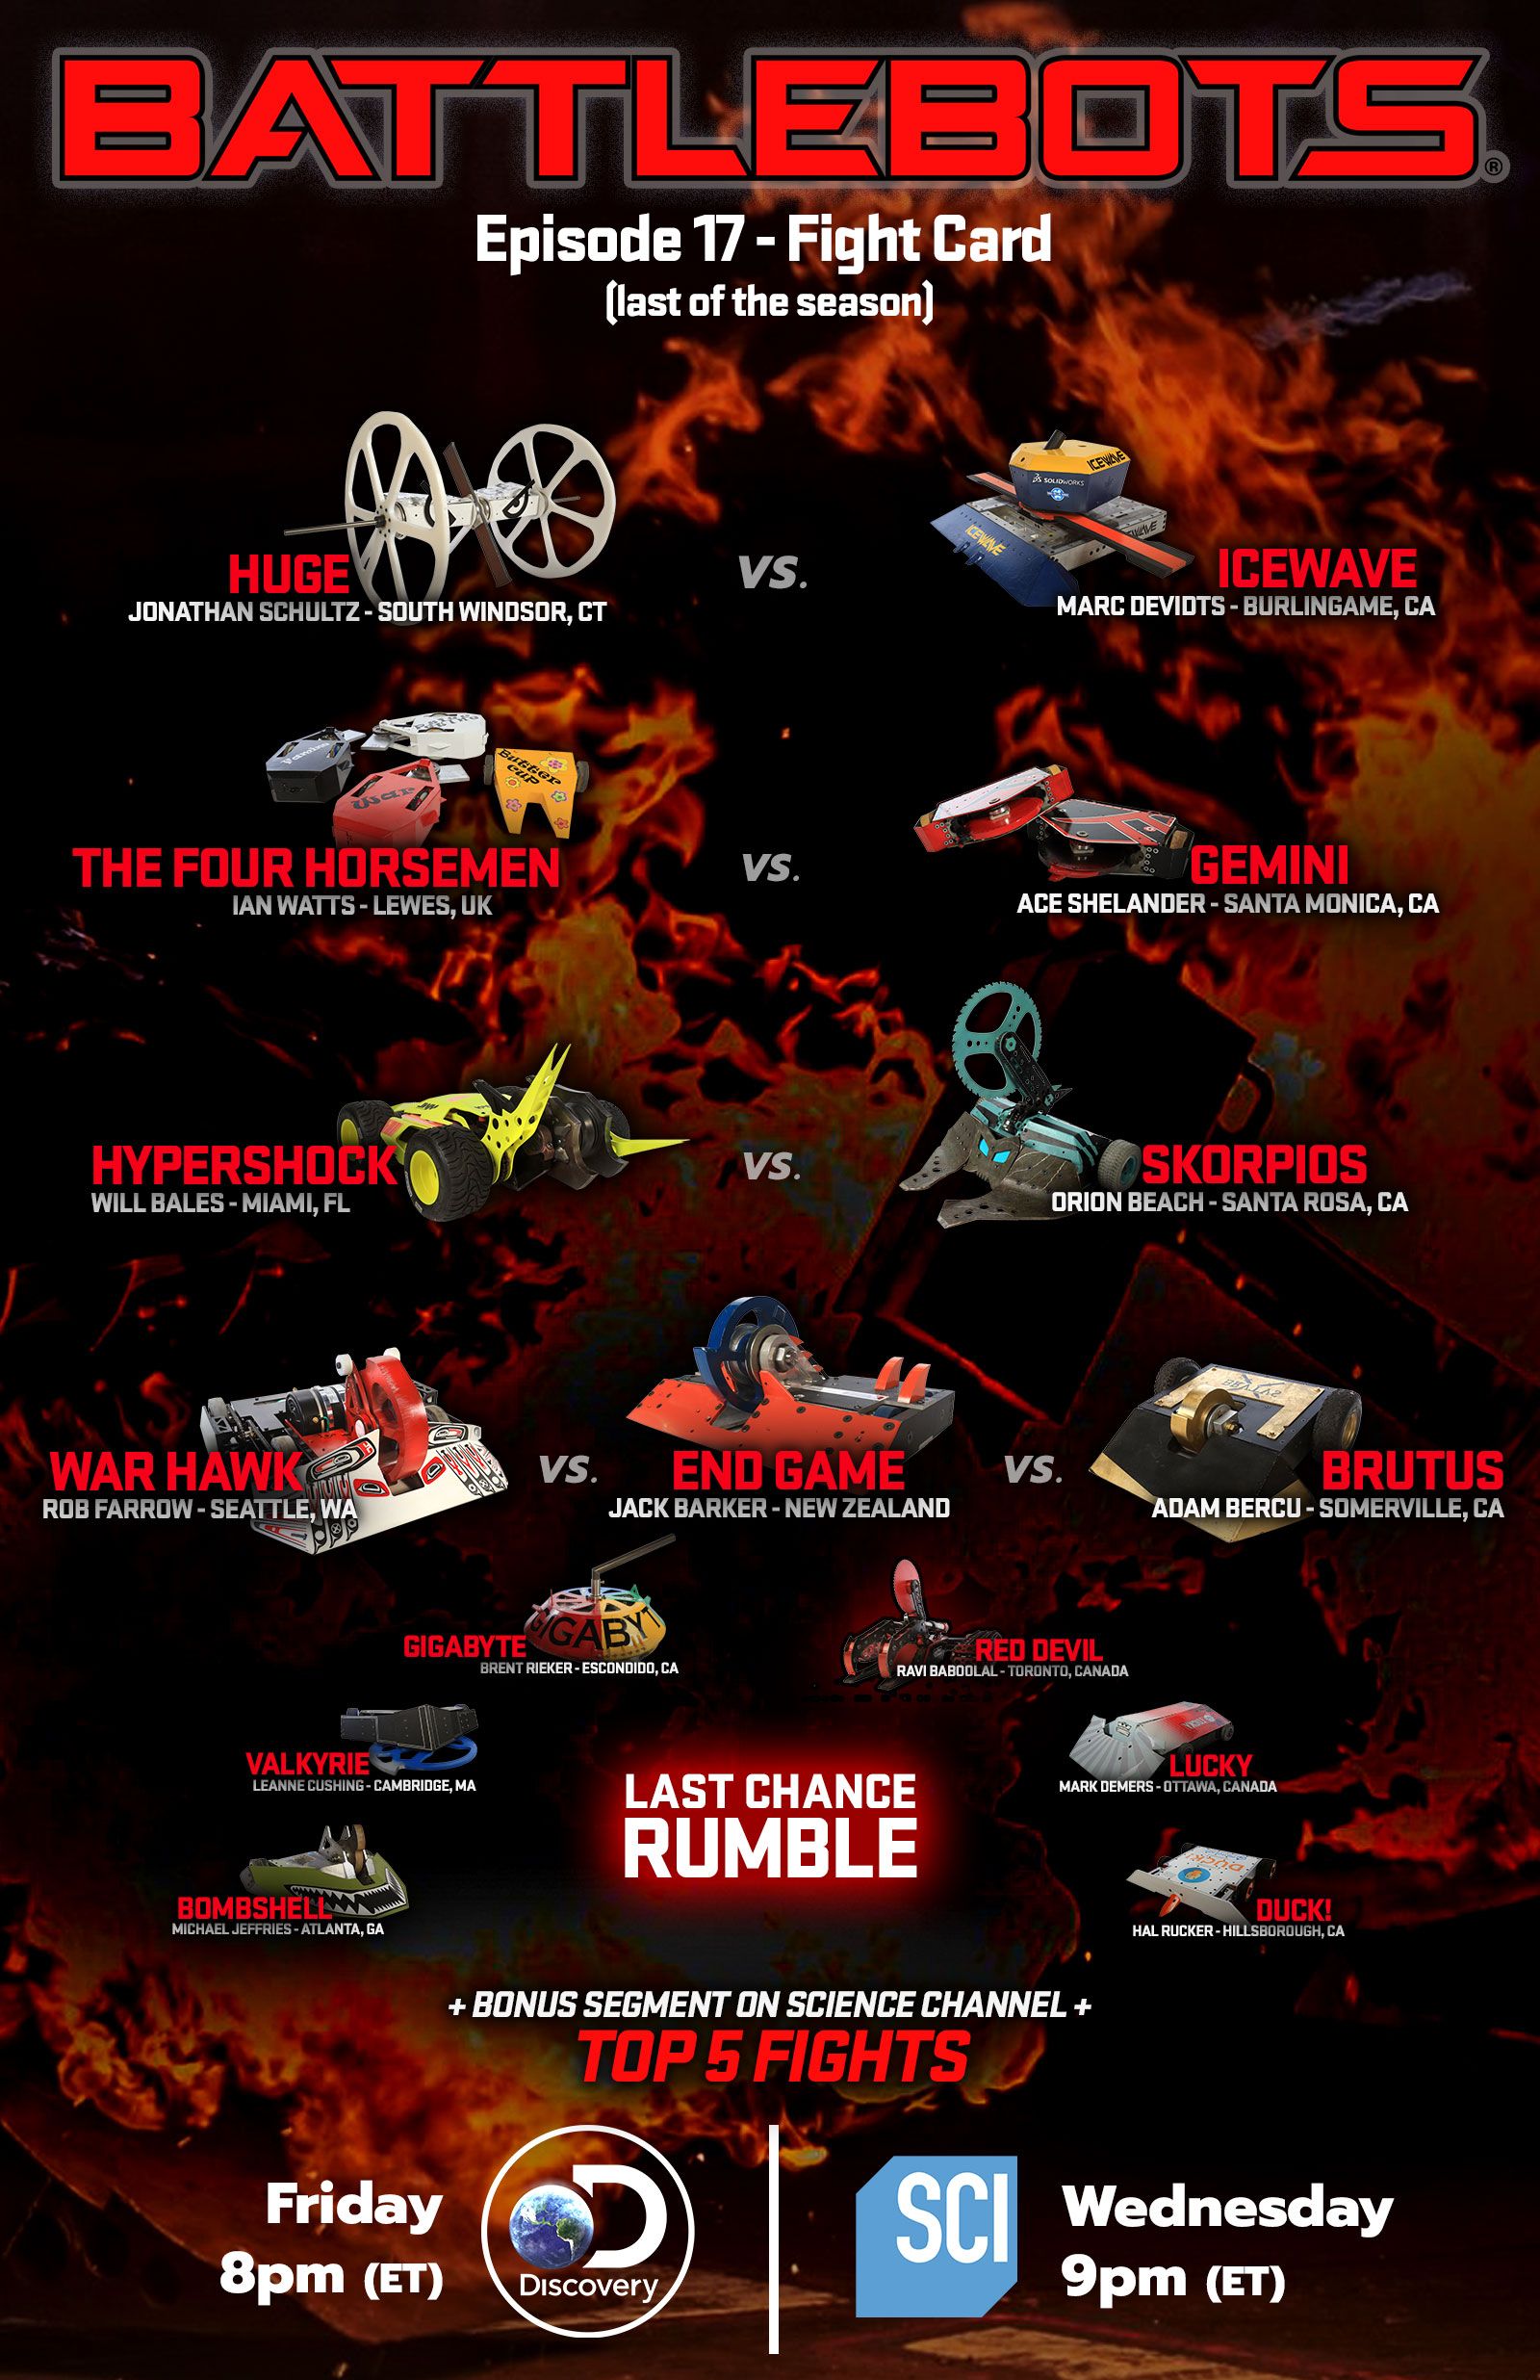 Landgoed puzzel Respectvol BattleBots on Twitter: "Ah the Final Fight Card of 2018 - and what's that?  Two rumbles? Yes indeed: The Disc Spinner Play-in Rumble, and the Last  Chance Rumble, the winners of which